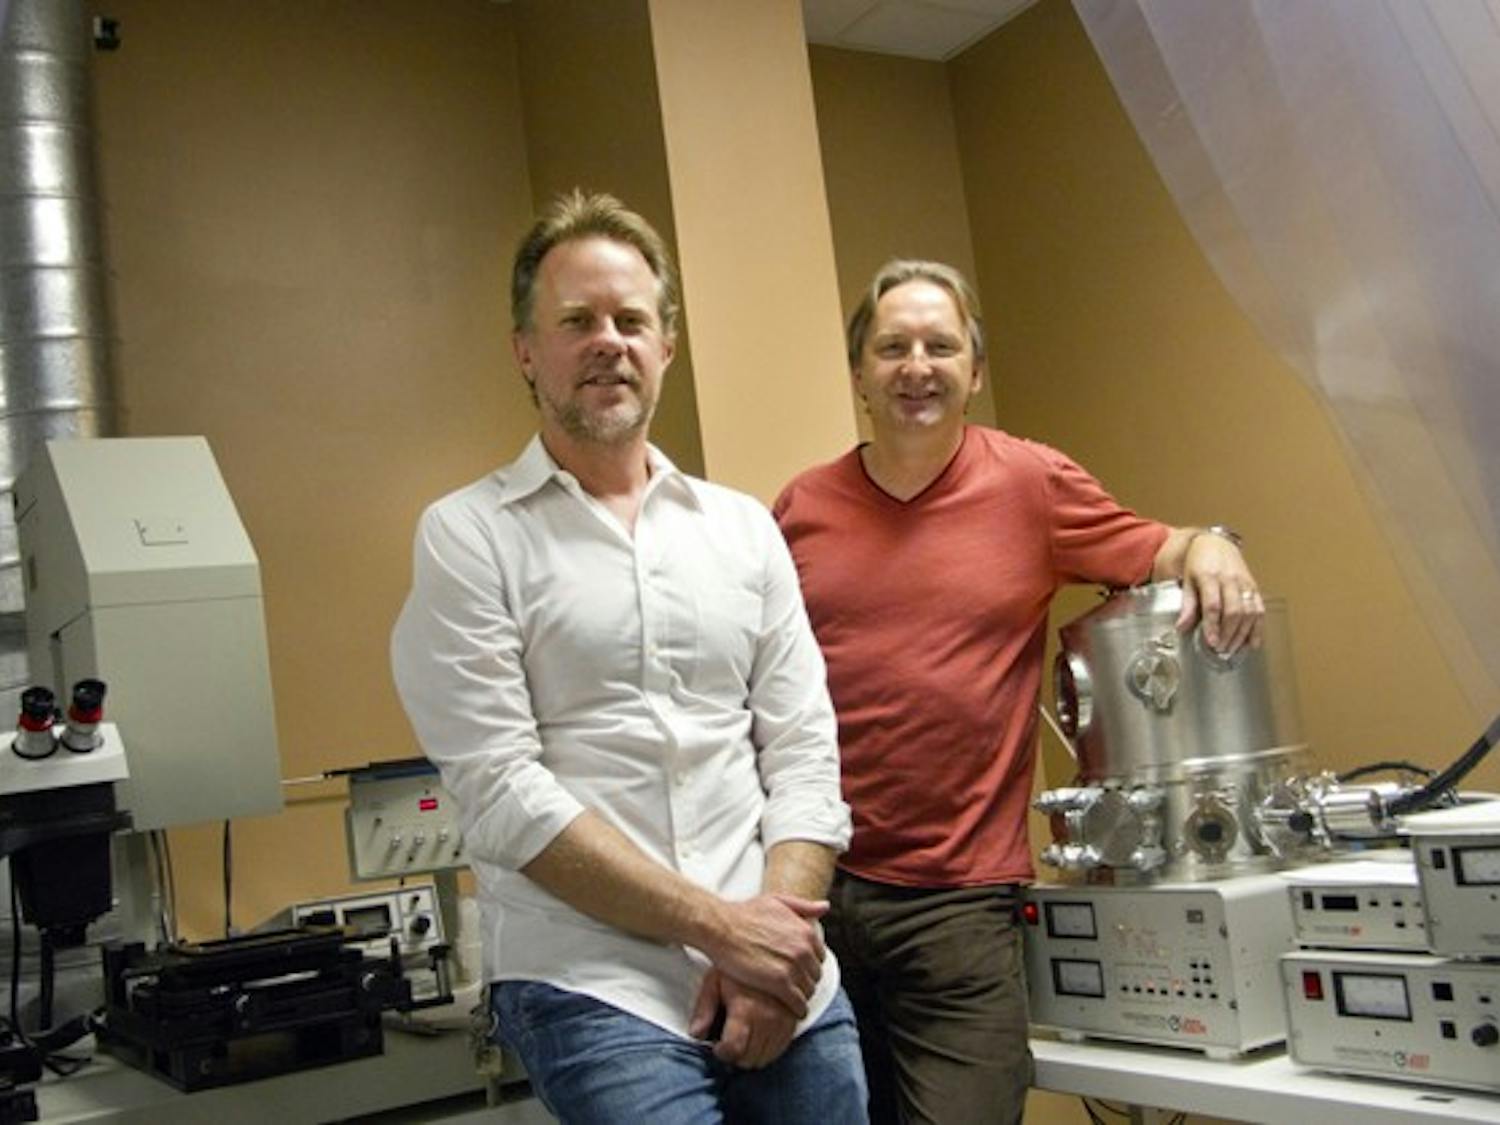 ASU professors Hugh Barnaby and Michael Kozicki are developing electronic technology that will withstand extreme and hostile environments where other electronics would not survive, such as space. (Photo courtesy of Jessica Slater)